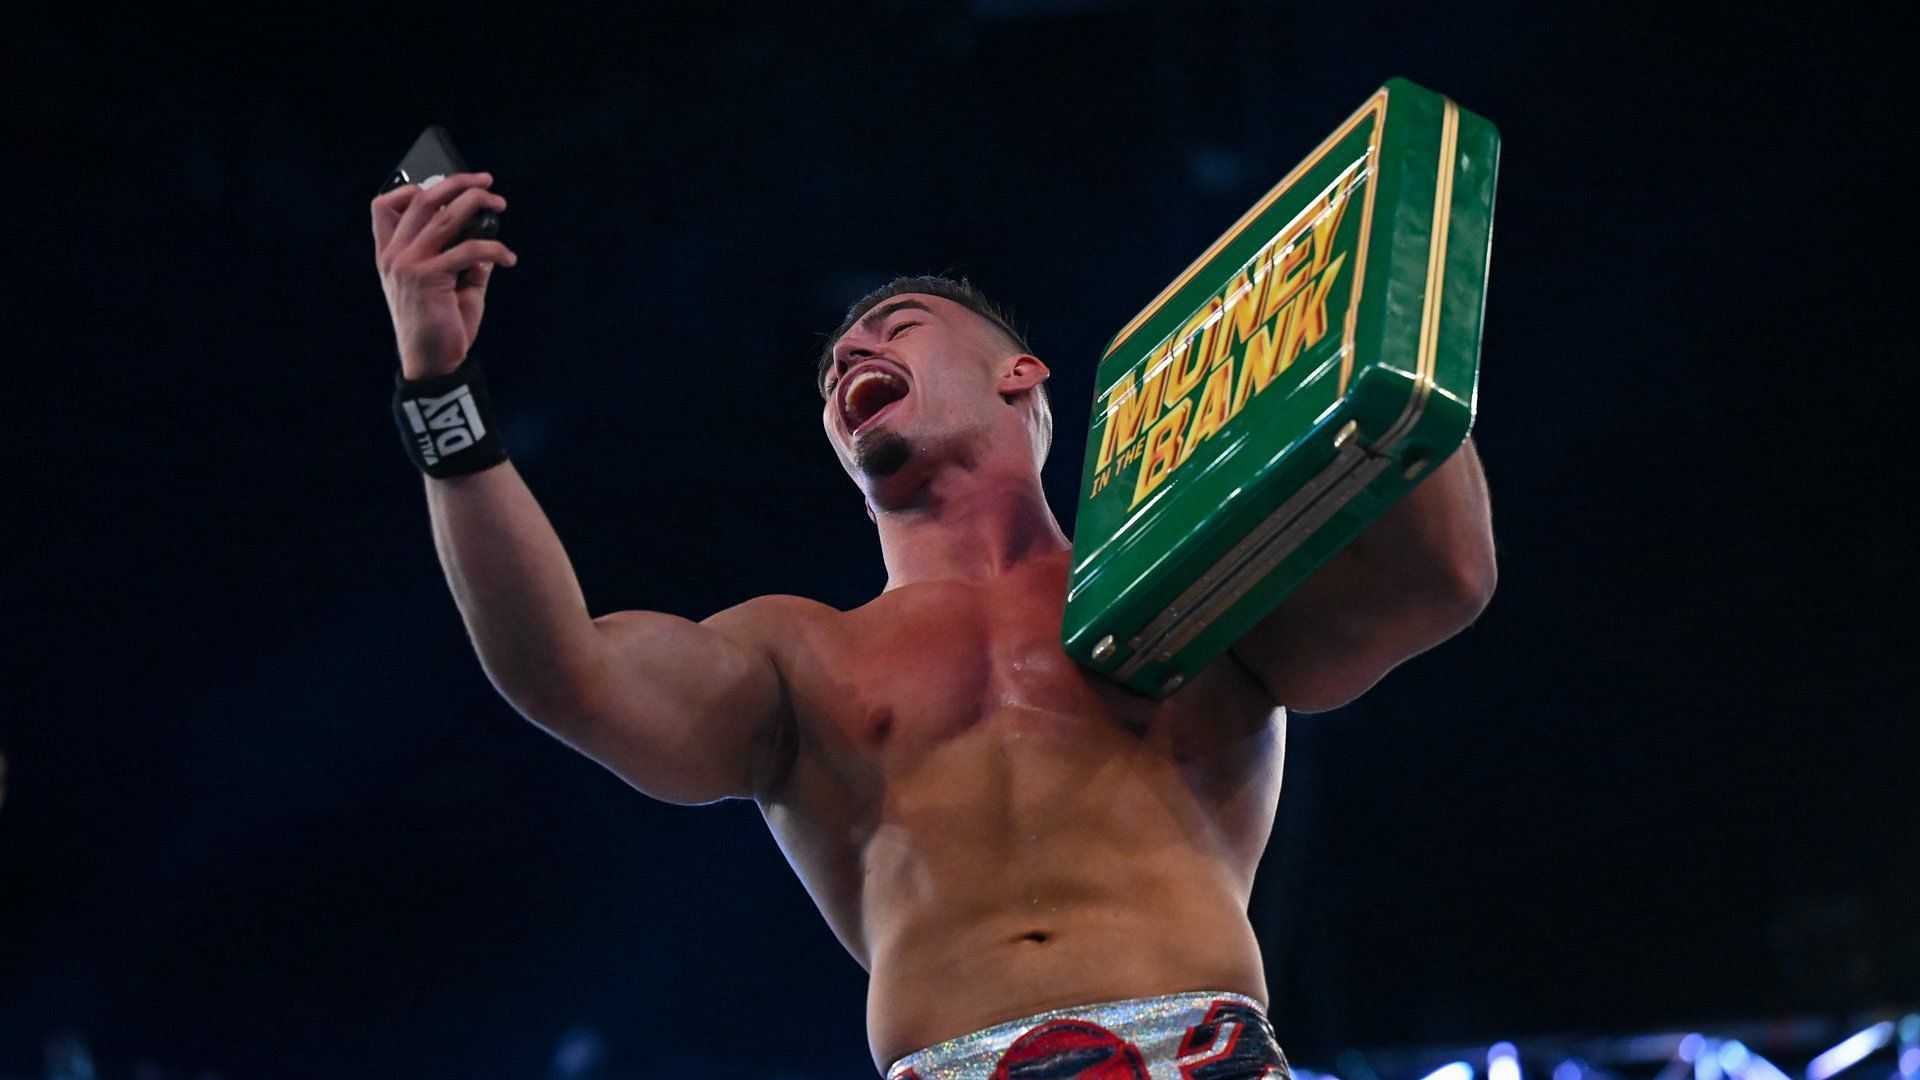 Theory is Mr. Money in the Bank